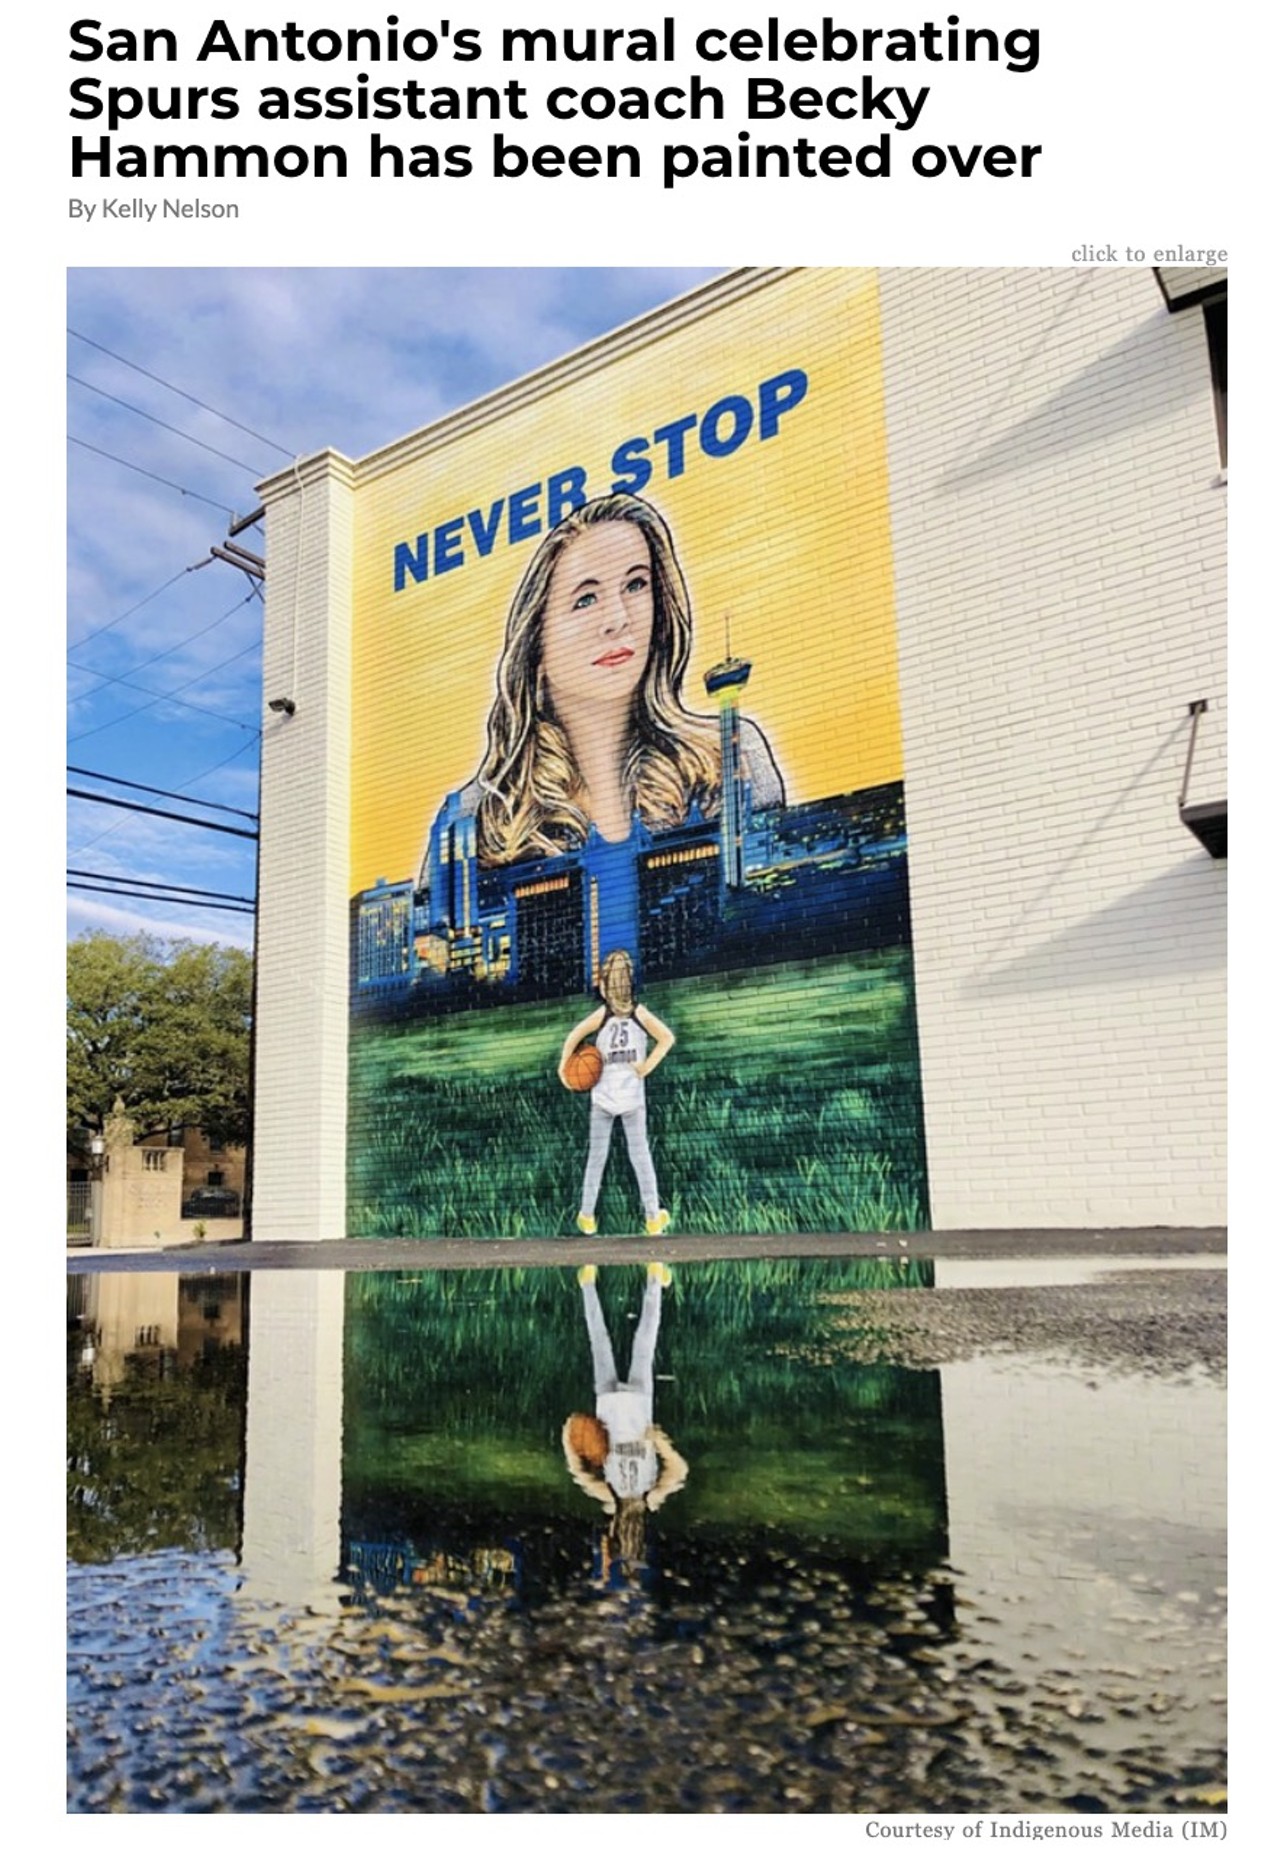 15. San Antonio's mural celebrating Spurs assistant coach Becky Hammon has been painted over 